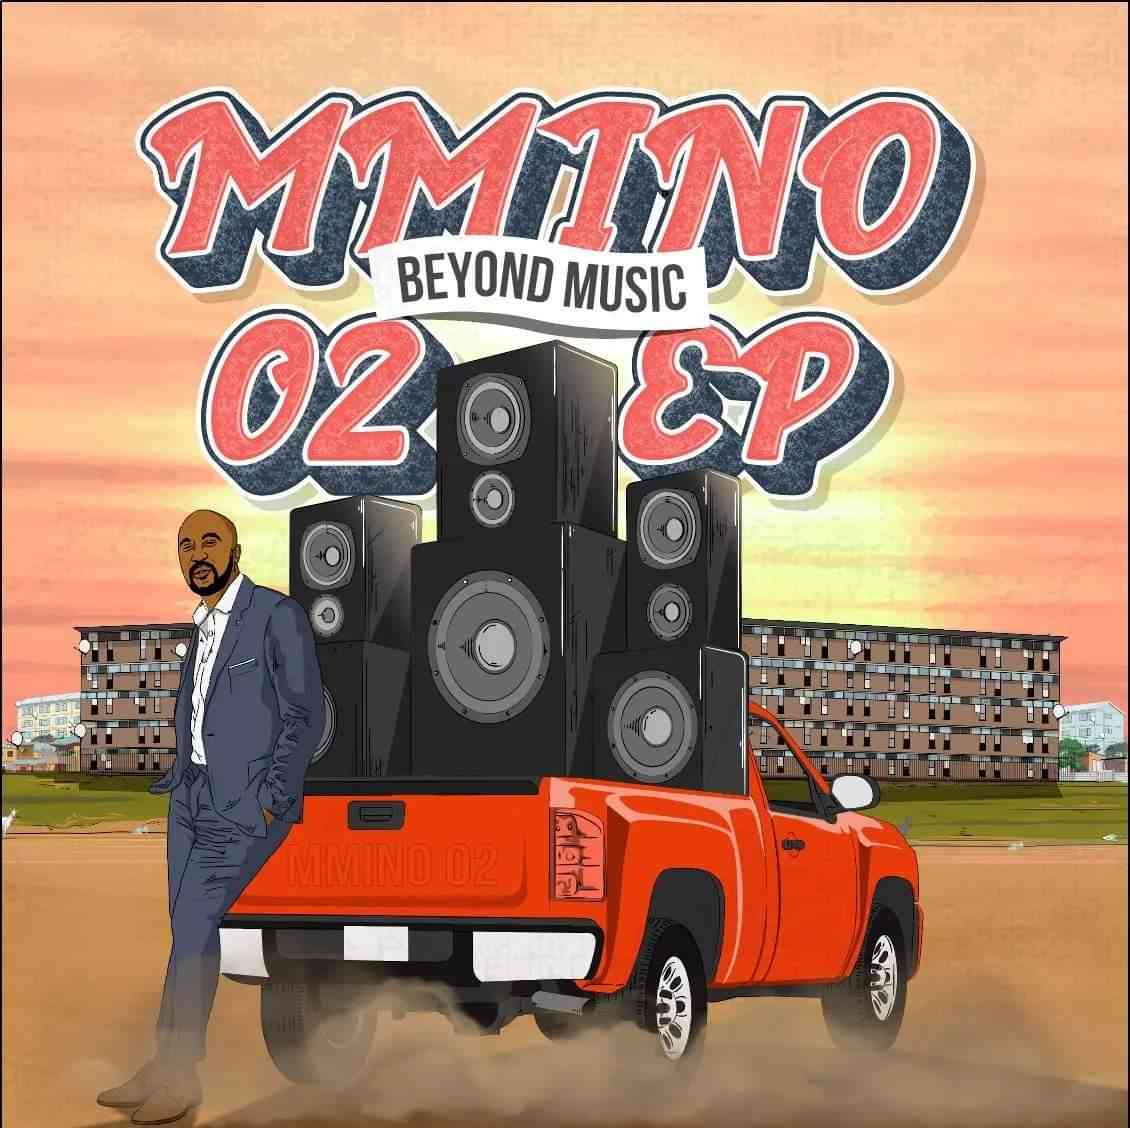 Beyond Music Shares List of Artists Featured on “Mmino 2 EP”